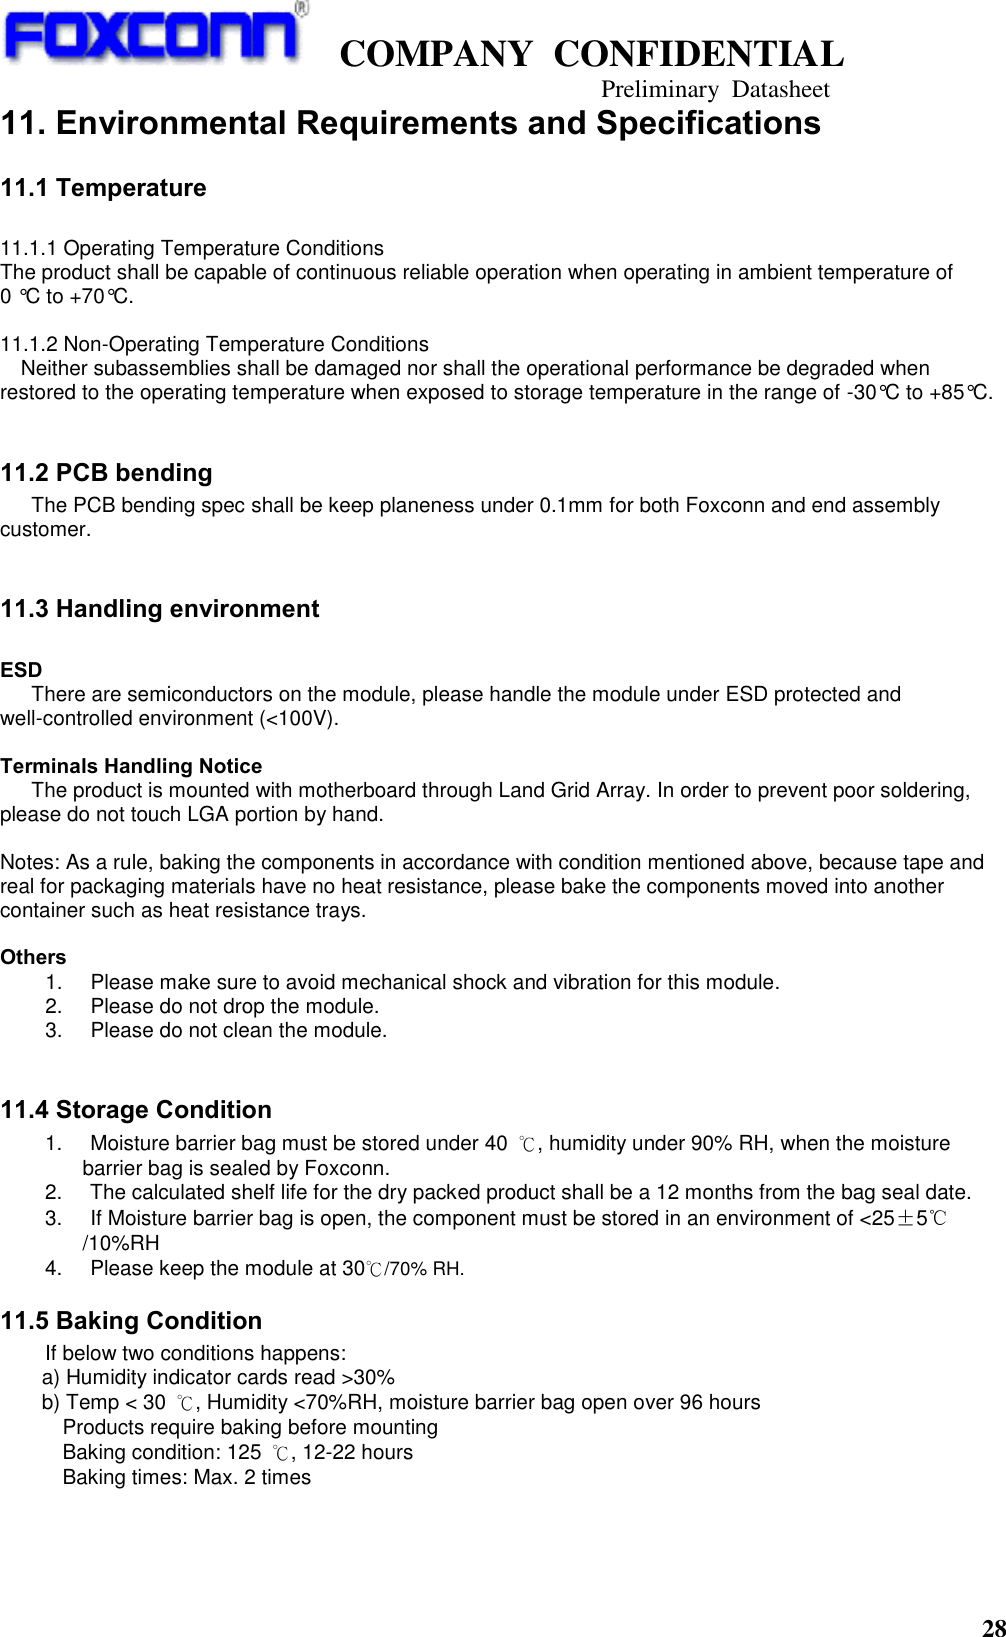   COMPANY  CONFIDENTIAL                                   Preliminary  Datasheet 28  11. Environmental Requirements and Specifications 11.1 Temperature  11.1.1 Operating Temperature Conditions The product shall be capable of continuous reliable operation when operating in ambient temperature of   0 °C to +70°C.  11.1.2 Non-Operating Temperature Conditions Neither subassemblies shall be damaged nor shall the operational performance be degraded when restored to the operating temperature when exposed to storage temperature in the range of -30°C to +85°C.  11.2 PCB bending    The PCB bending spec shall be keep planeness under 0.1mm for both Foxconn and end assembly customer.  11.3 Handling environment  ESD    There are semiconductors on the module, please handle the module under ESD protected and well-controlled environment (&lt;100V).    Terminals Handling Notice The product is mounted with motherboard through Land Grid Array. In order to prevent poor soldering, please do not touch LGA portion by hand.  Notes: As a rule, baking the components in accordance with condition mentioned above, because tape and real for packaging materials have no heat resistance, please bake the components moved into another container such as heat resistance trays.  Others 1.       Please make sure to avoid mechanical shock and vibration for this module. 2.       Please do not drop the module. 3.       Please do not clean the module.  11.4 Storage Condition   1.       Moisture barrier bag must be stored under 40  ℃, humidity under 90% RH, when the moisture barrier bag is sealed by Foxconn.   2.       The calculated shelf life for the dry packed product shall be a 12 months from the bag seal date. 3.       If Moisture barrier bag is open, the component must be stored in an environment of &lt;25±5℃/10%RH 4.       Please keep the module at 30℃/70% RH.   11.5 Baking Condition If below two conditions happens:   a) Humidity indicator cards read &gt;30% b) Temp &lt; 30  ℃, Humidity &lt;70%RH, moisture barrier bag open over 96 hours Products require baking before mounting Baking condition: 125  ℃, 12-22 hours Baking times: Max. 2 times 